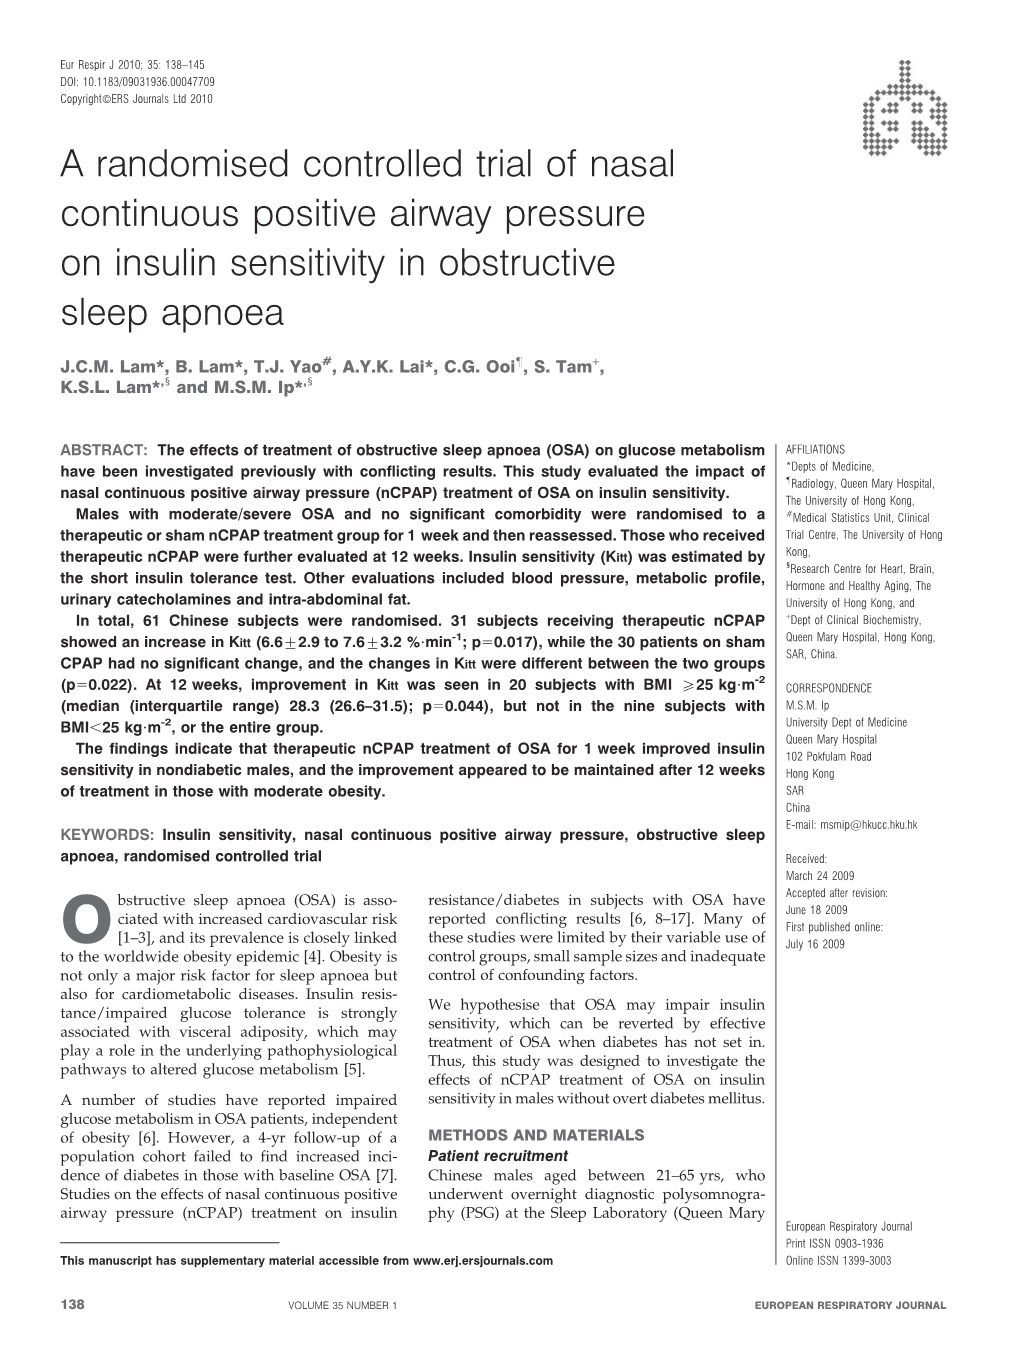 A Randomised Controlled Trial of Nasal Continuous Positive Airway Pressure on Insulin Sensitivity in Obstructive Sleep Apnoea